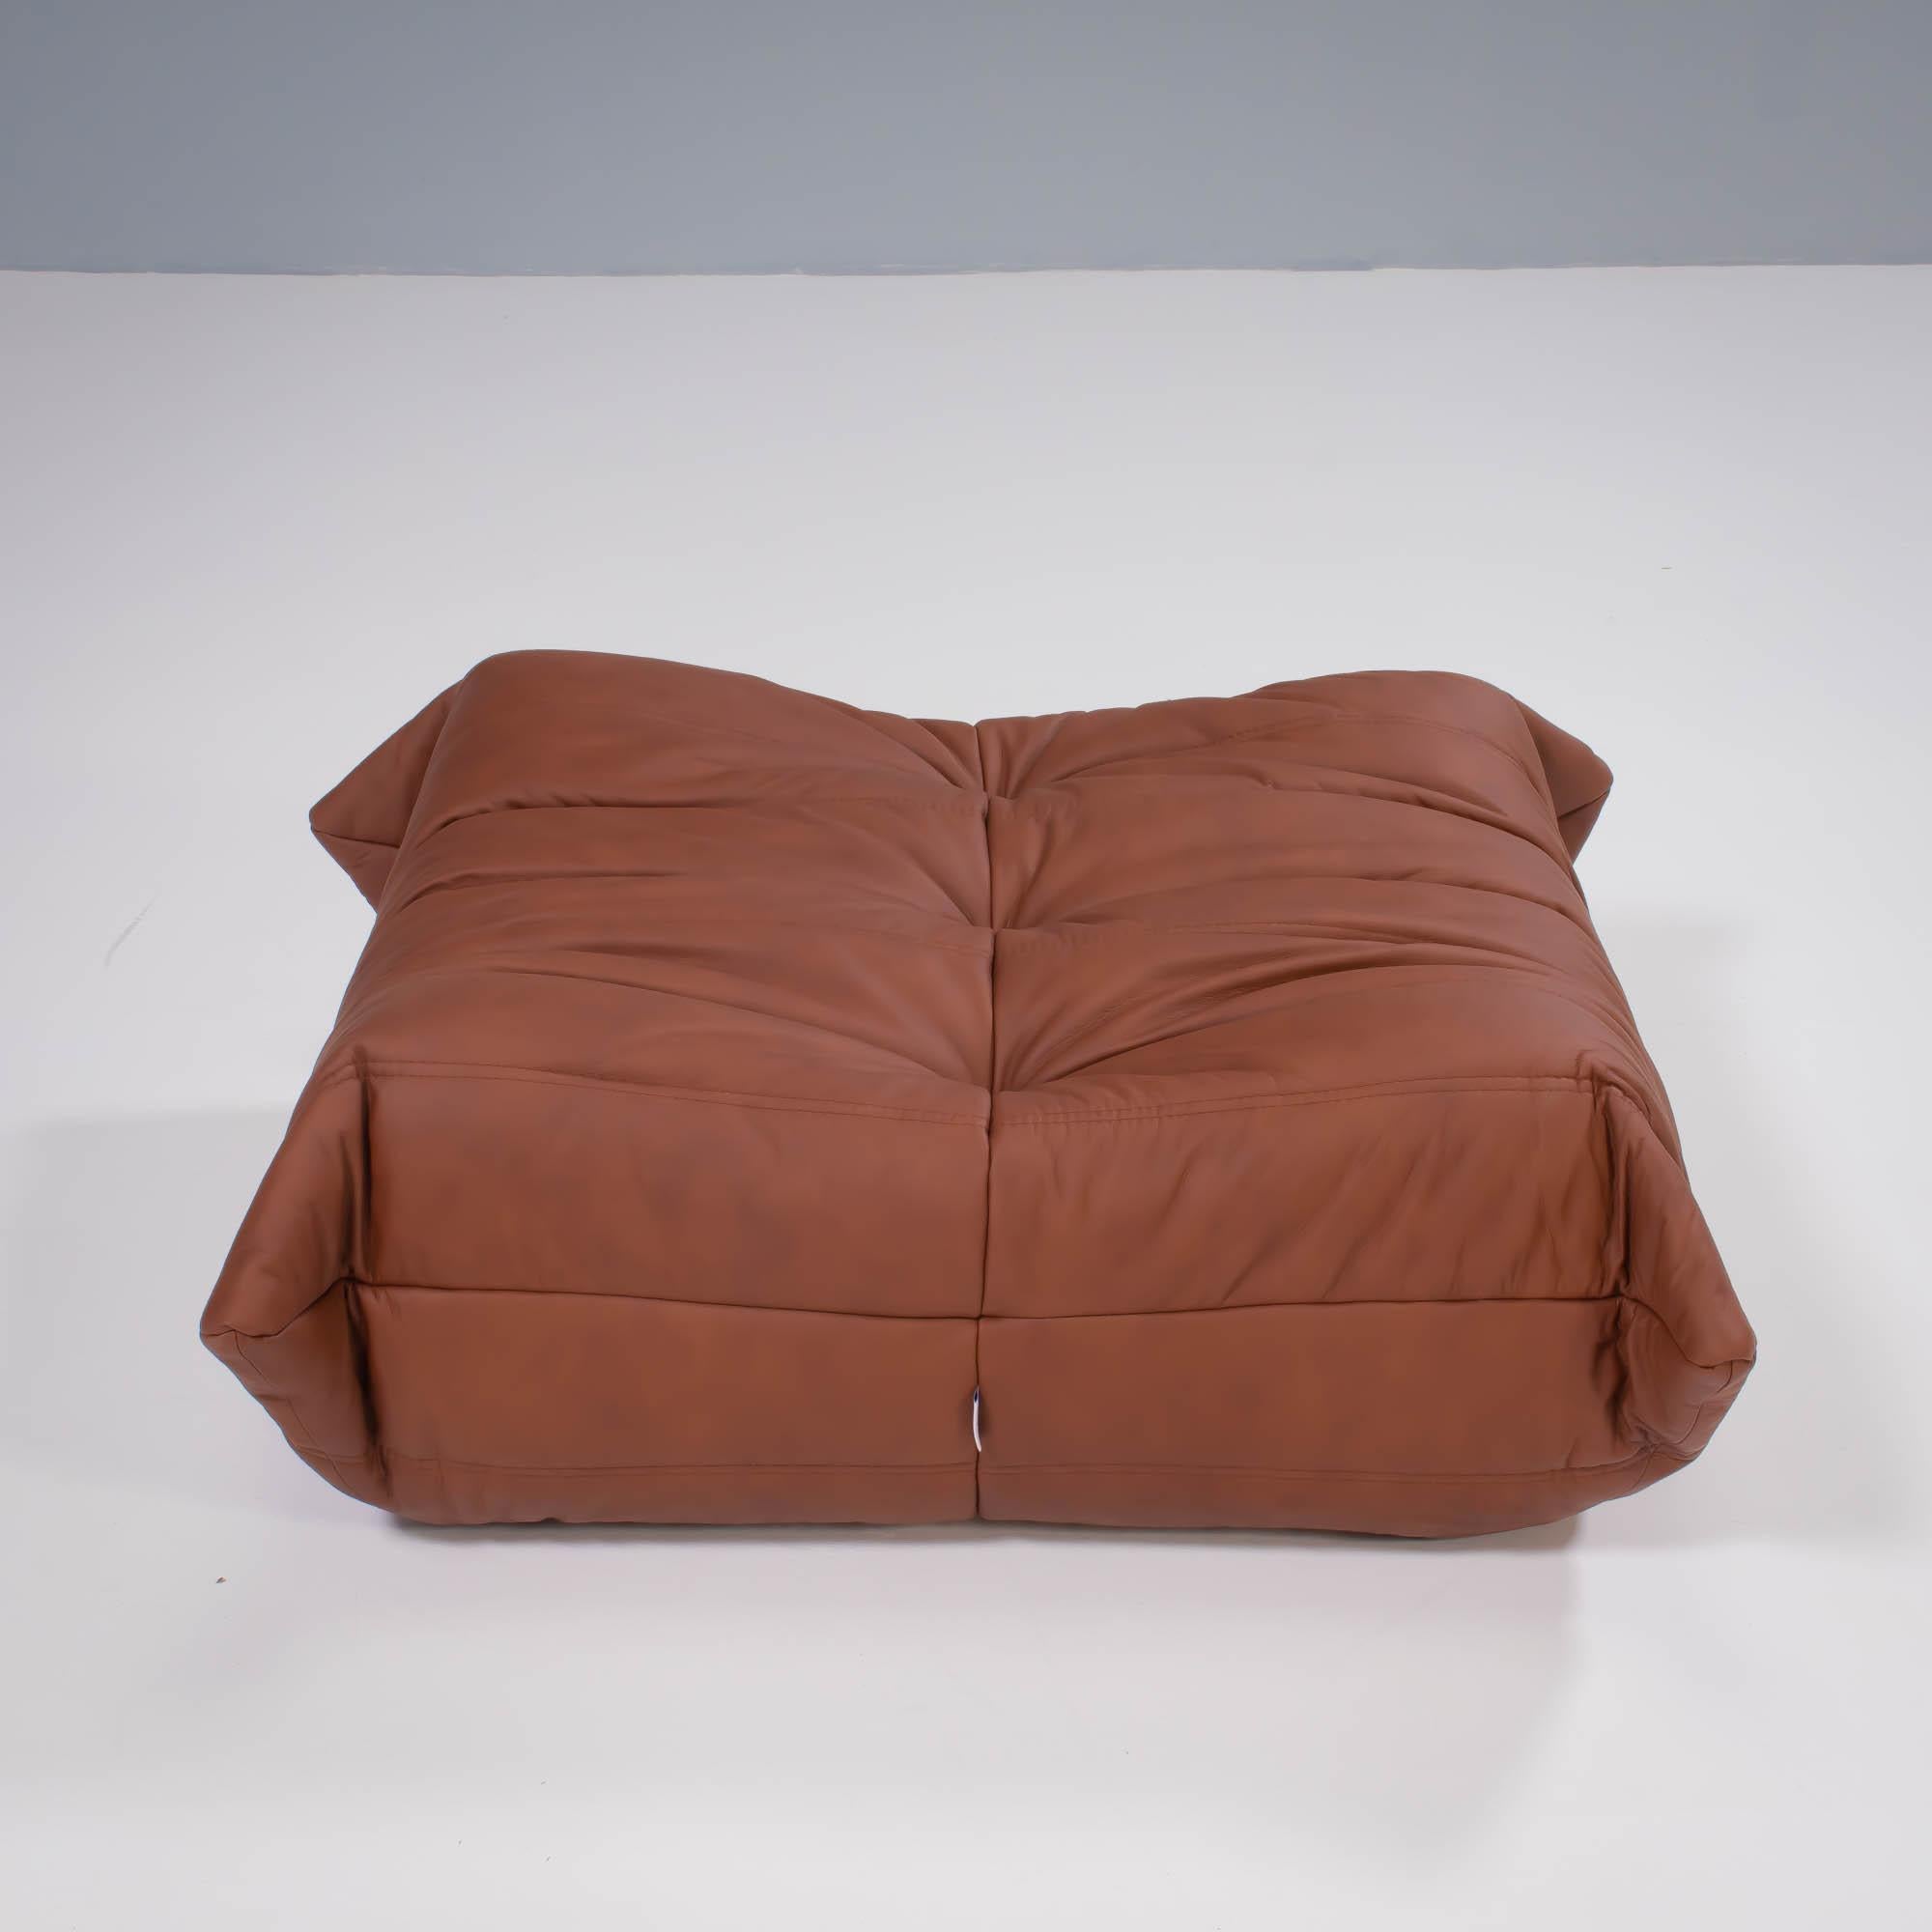 French Ligne Roset by Michel Ducaroy Togo Brown Leather Modular Sofa, Set of 4